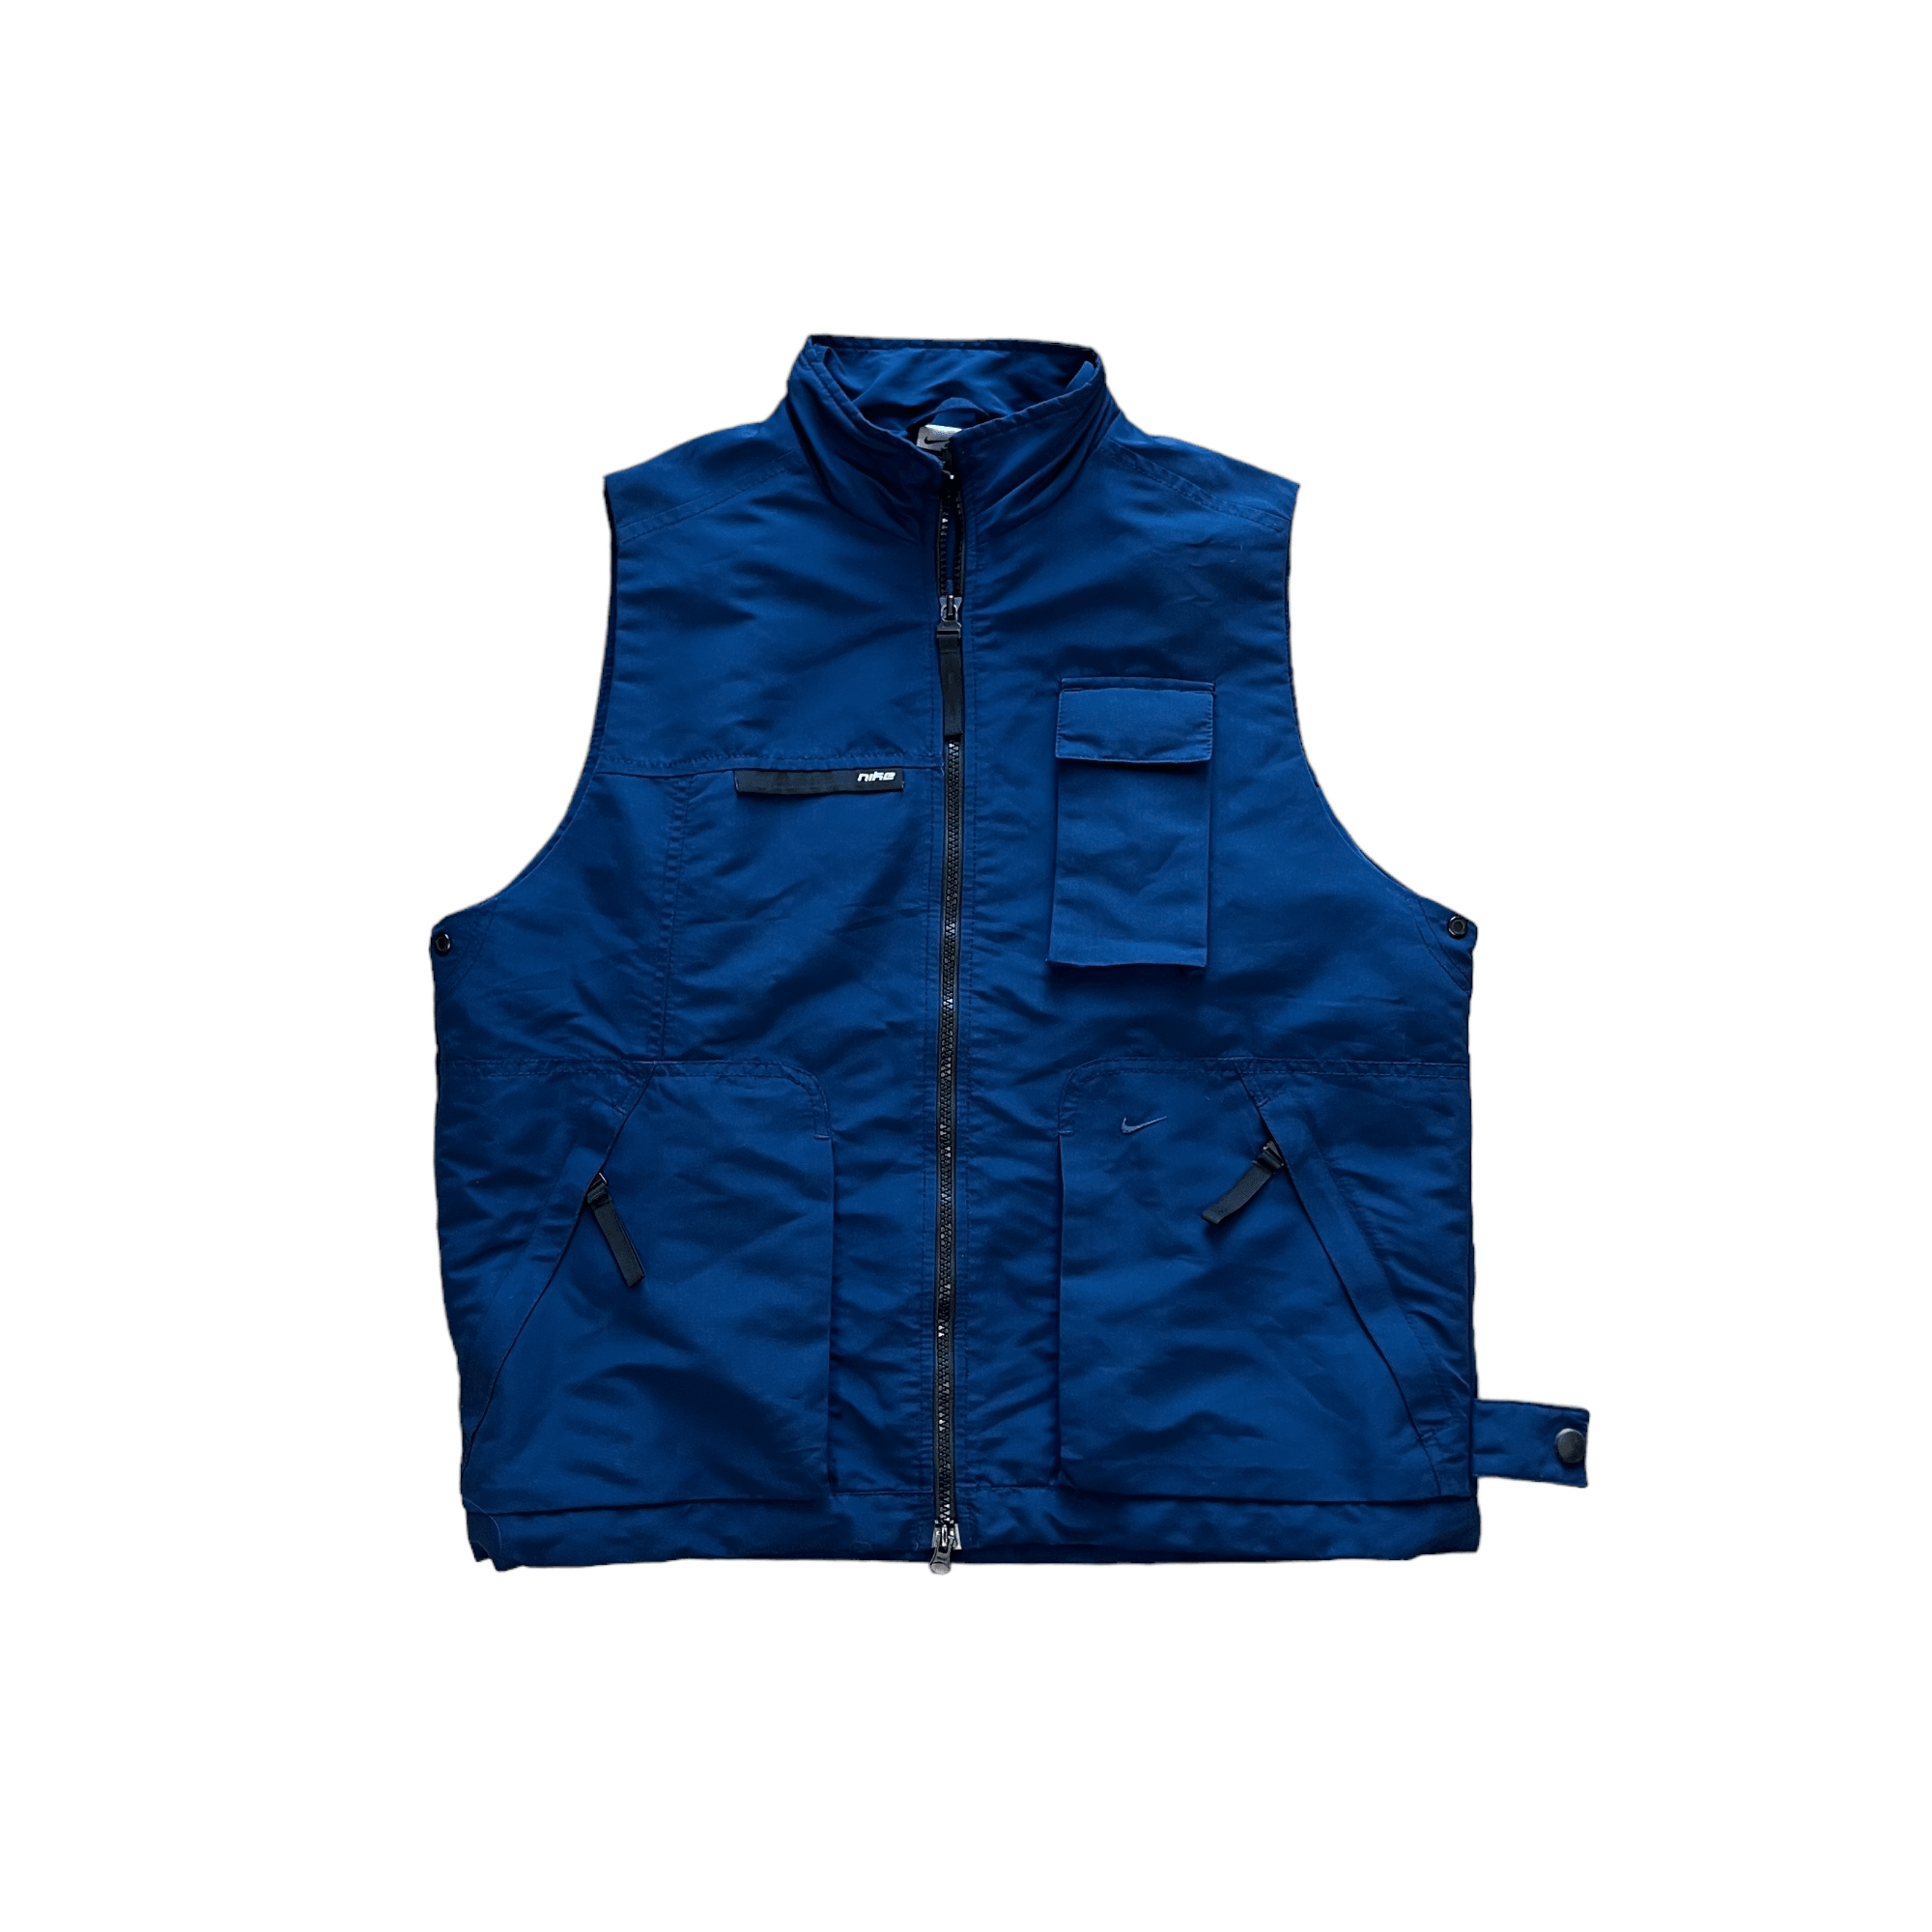 Vintage Navy Blue Nike Gilet - Recommended Size - Small - The Streetwear Studio